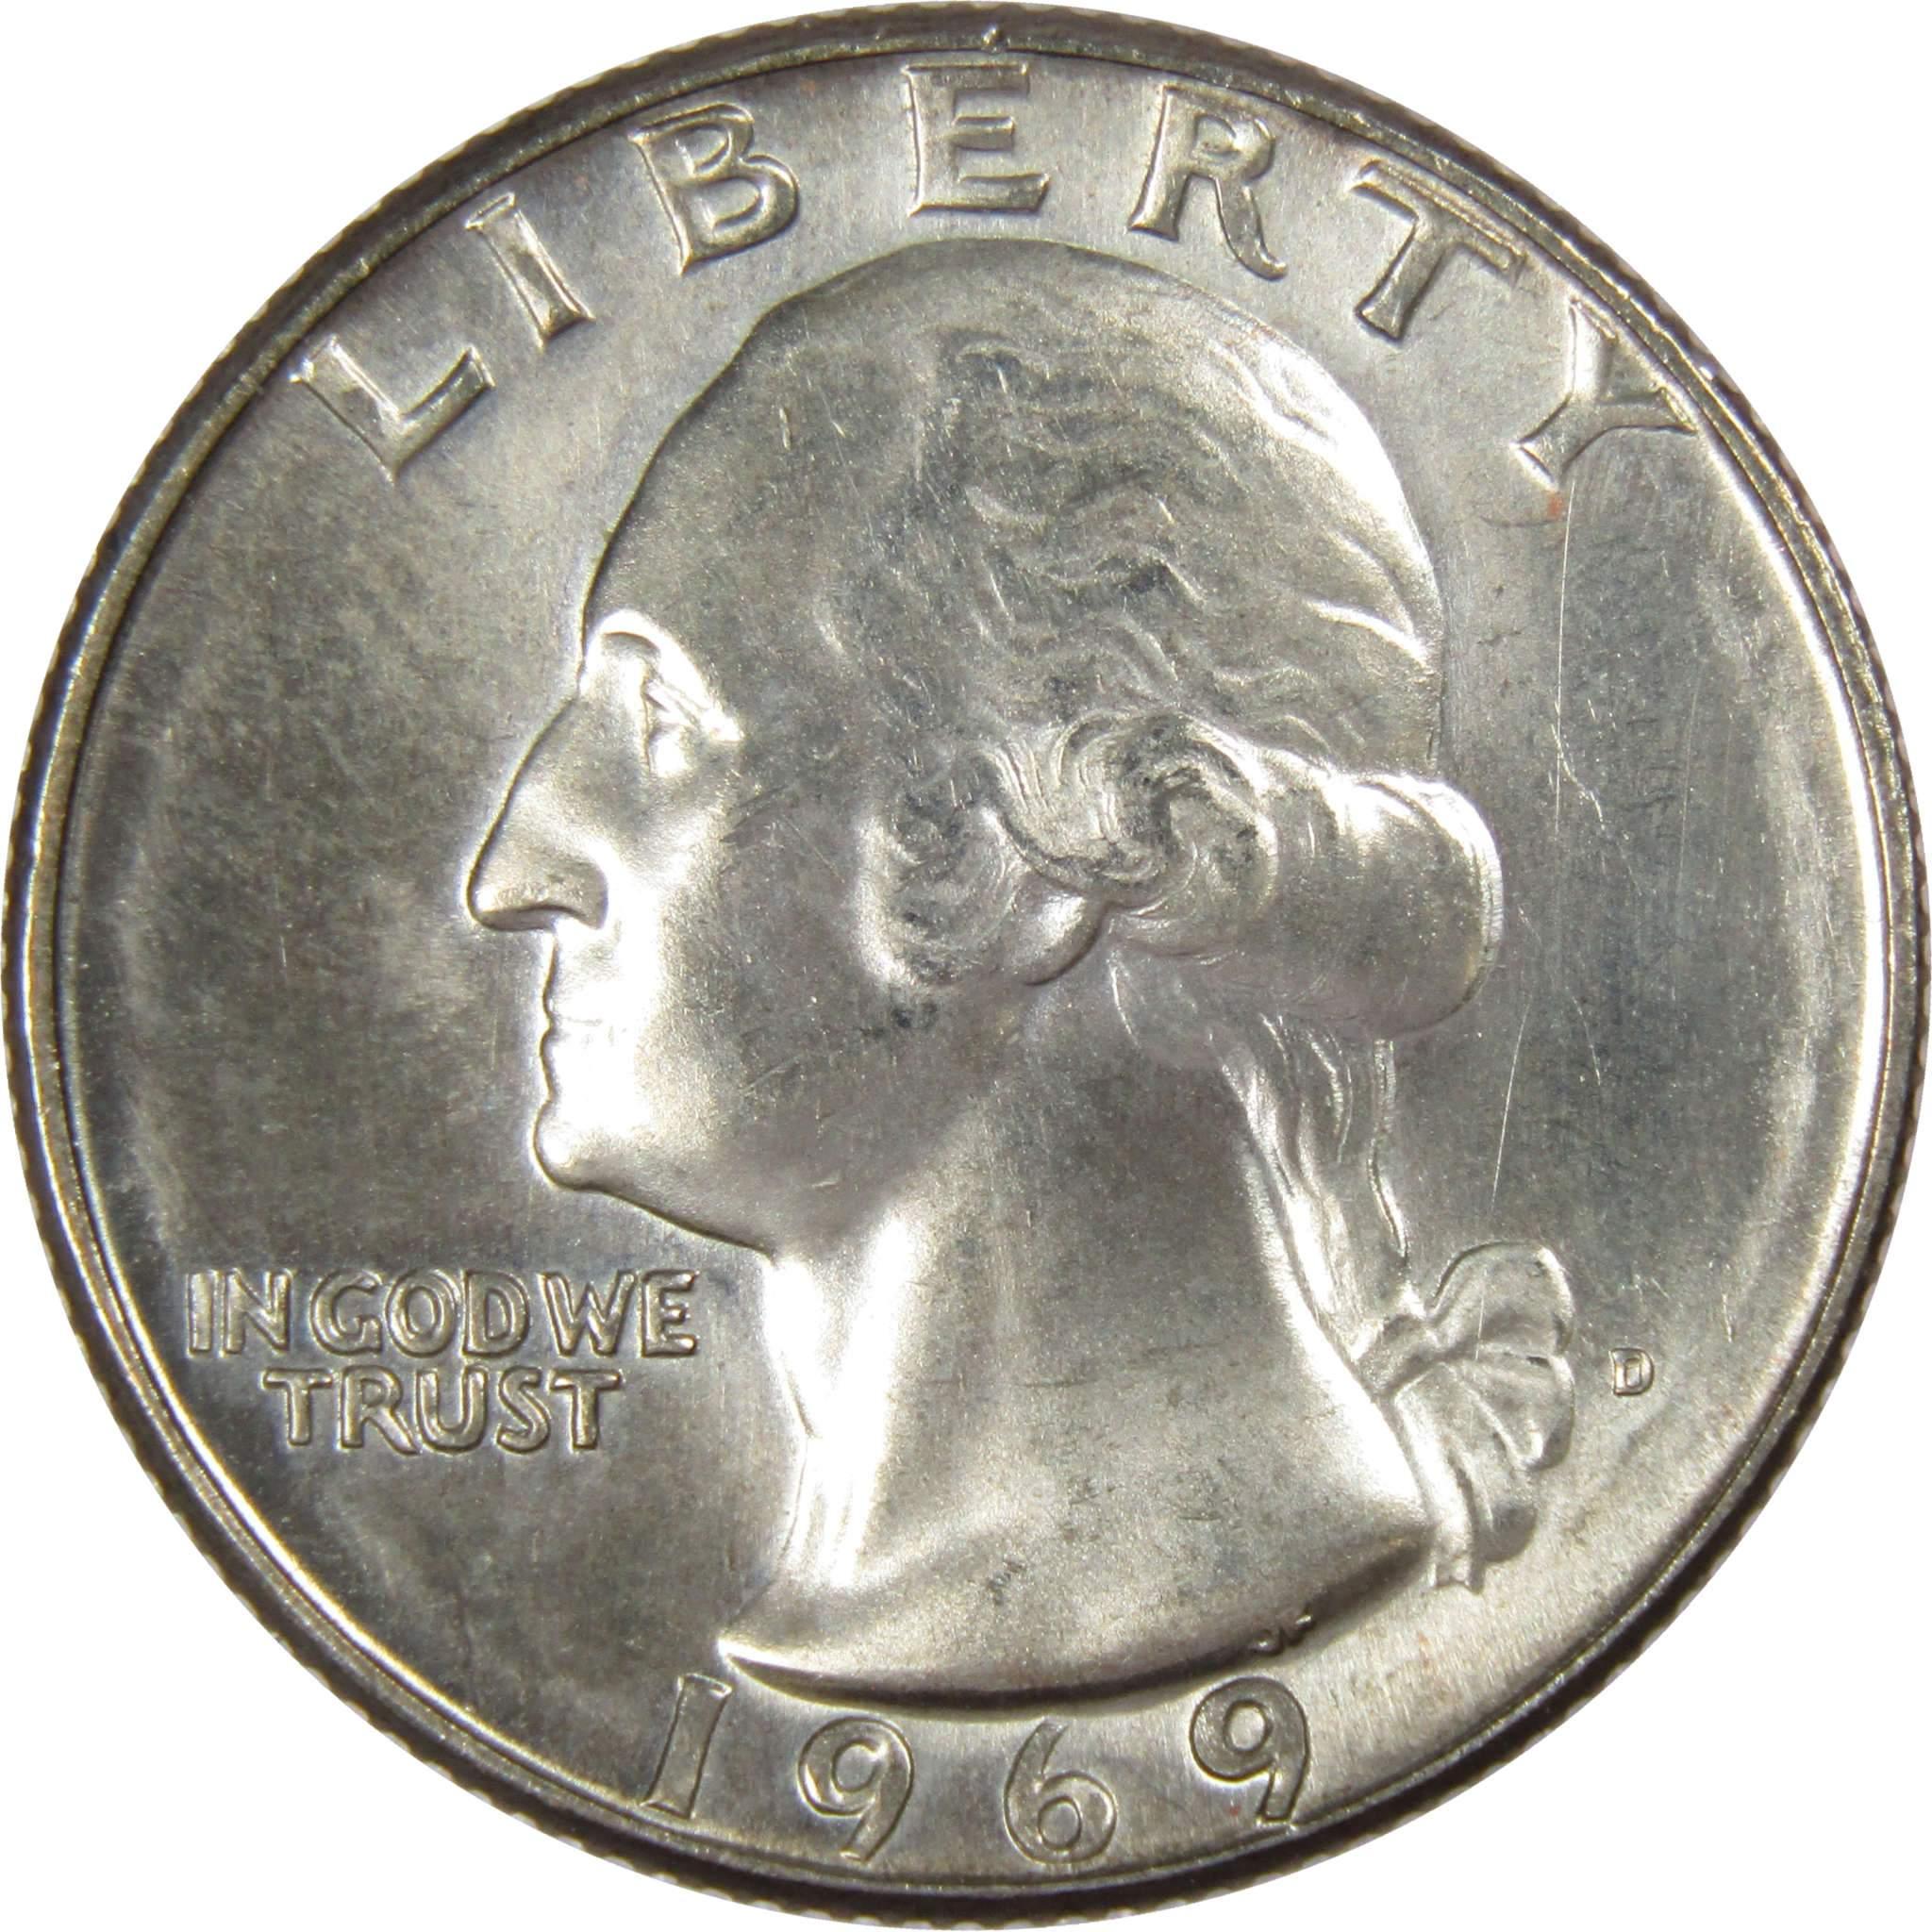 1969 D Washington Quarter BU Uncirculated Mint State 25c US Coin Collectible